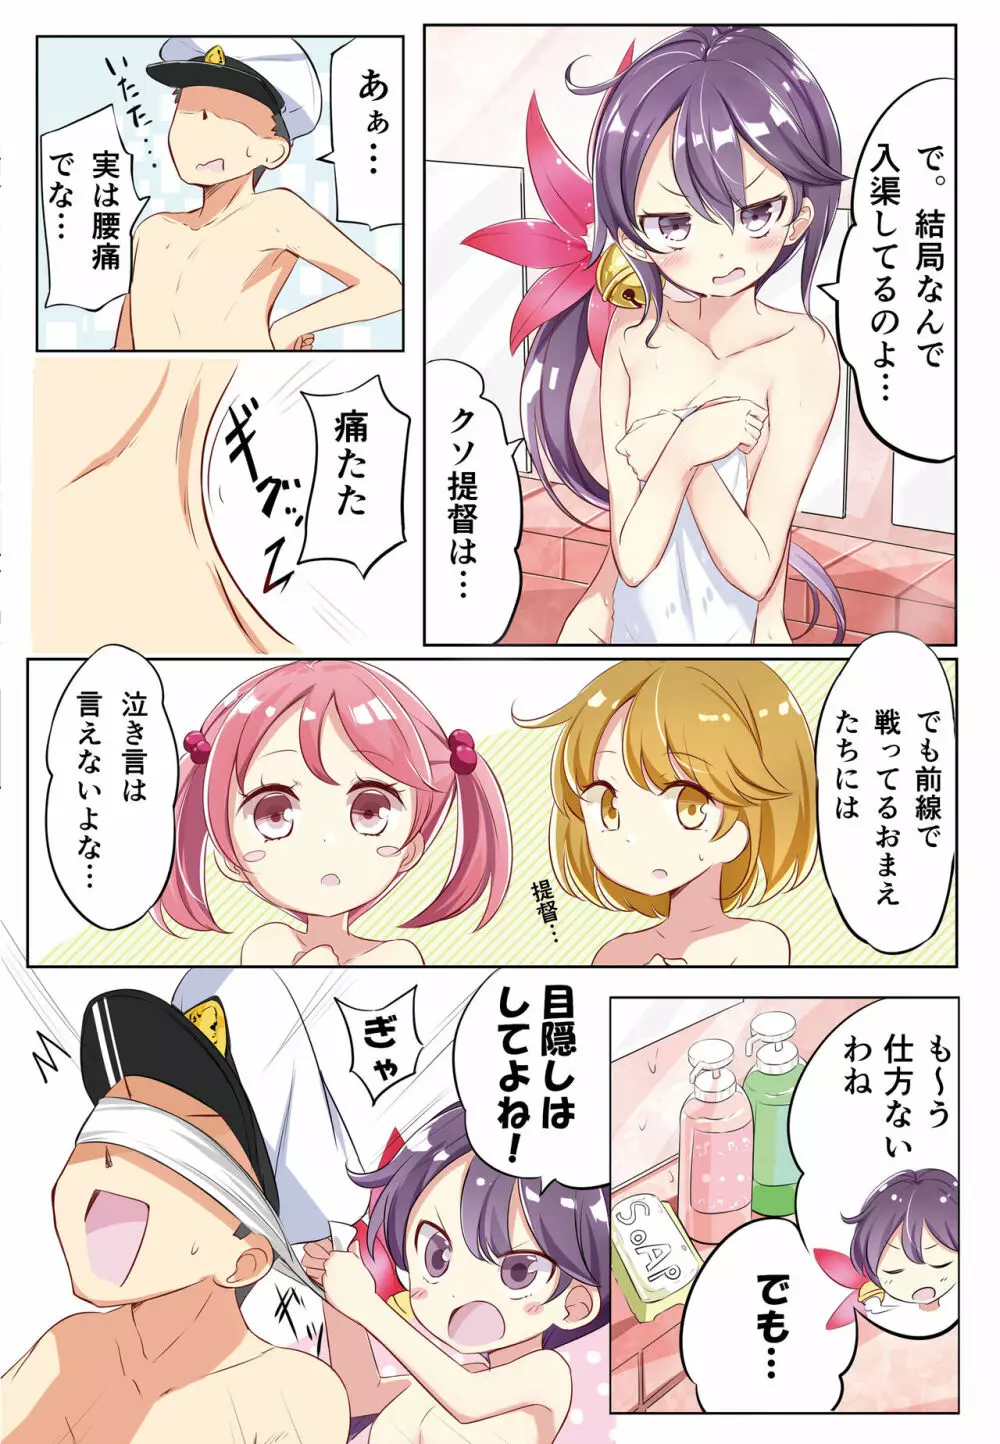 hamaken collection 総集編vol 9～12 プラス 七駆の乳くらべ Page.58